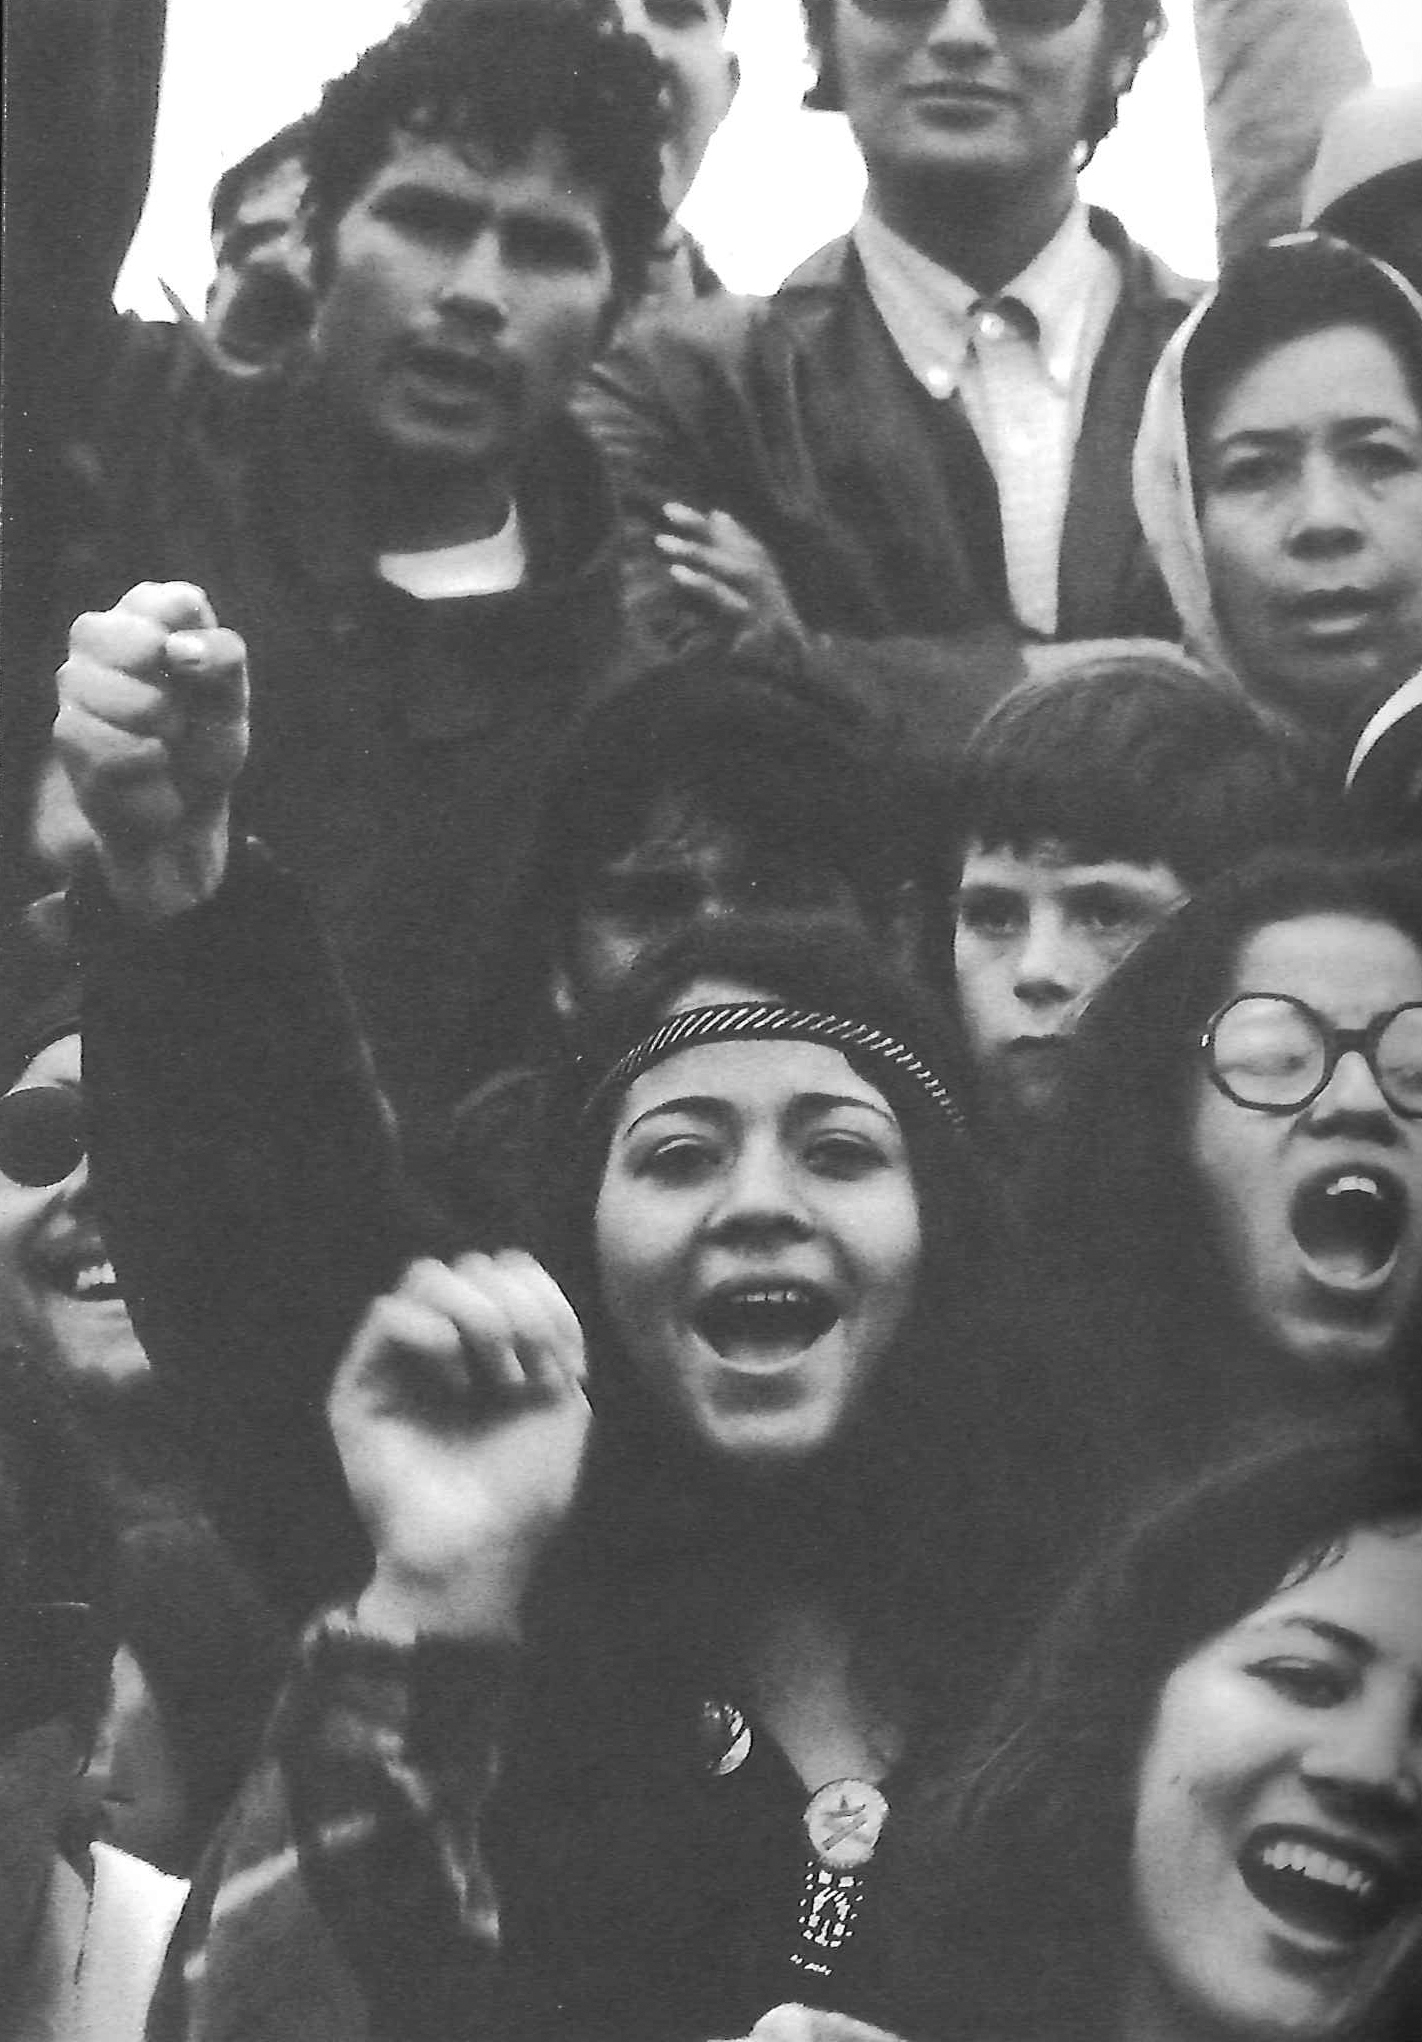 Chicanas fight oppression then and now